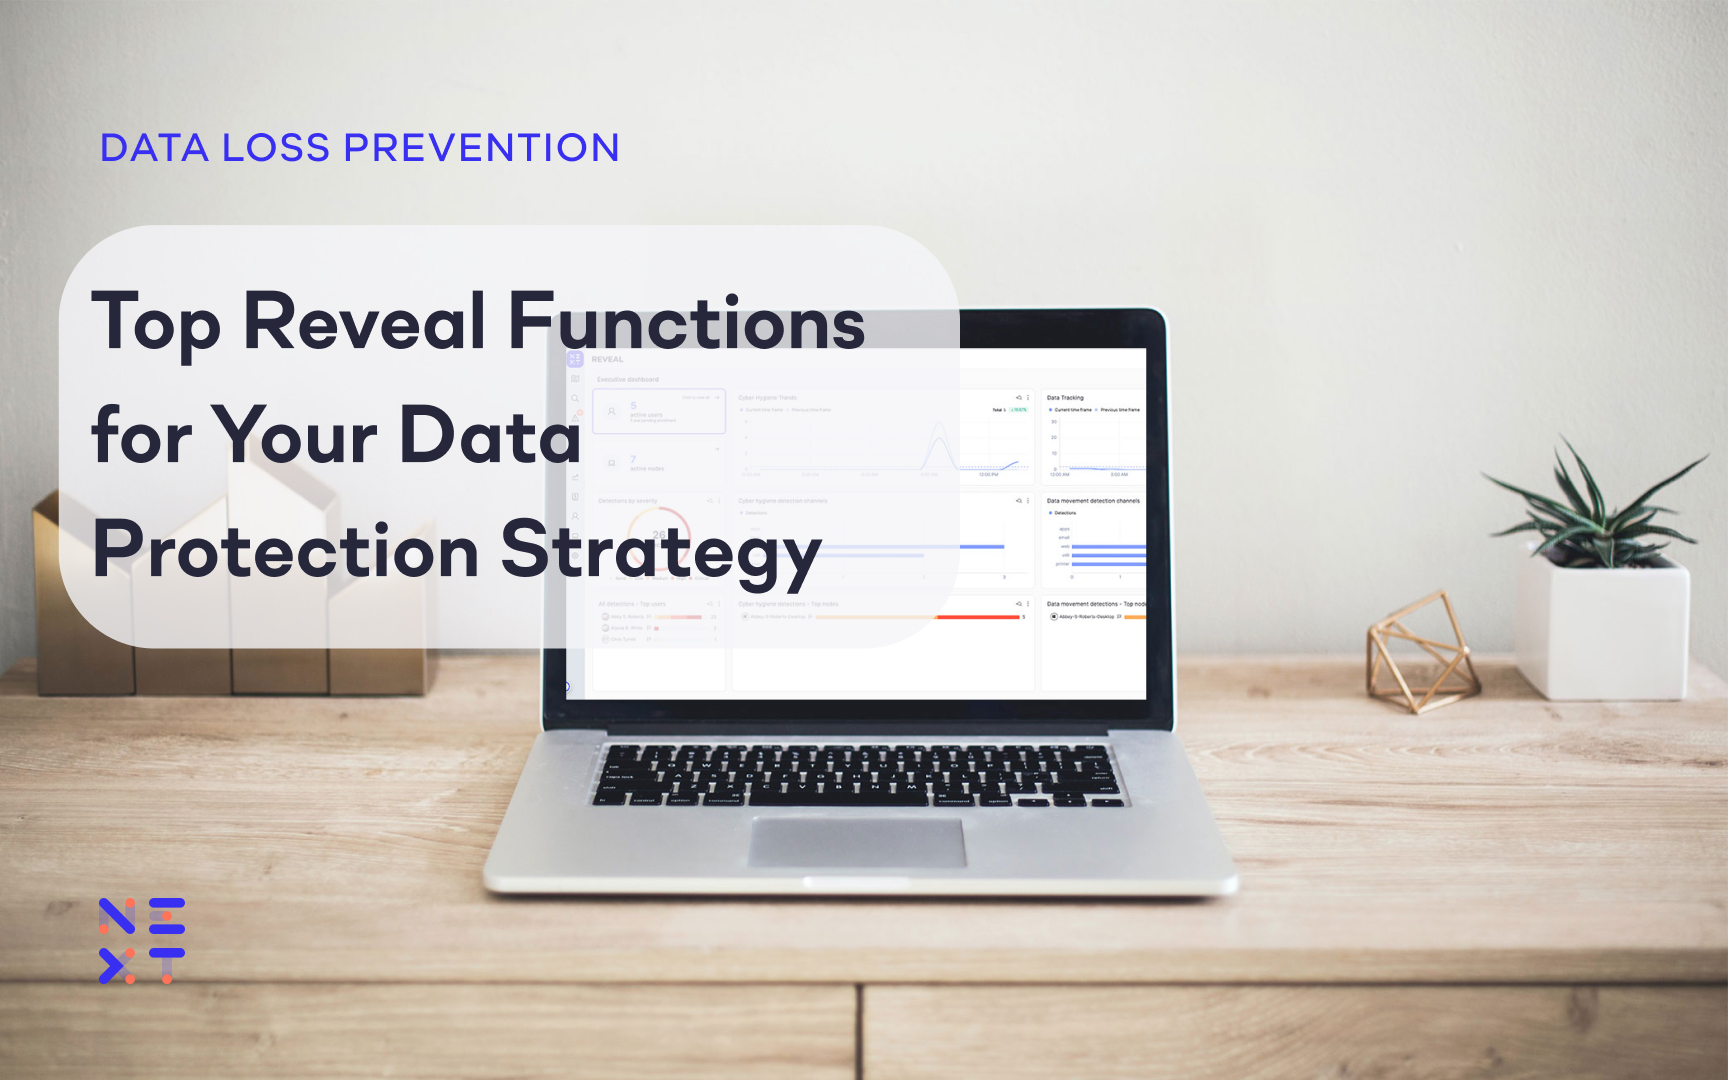 Top Reveal Functions for Your Data Protection Strategy